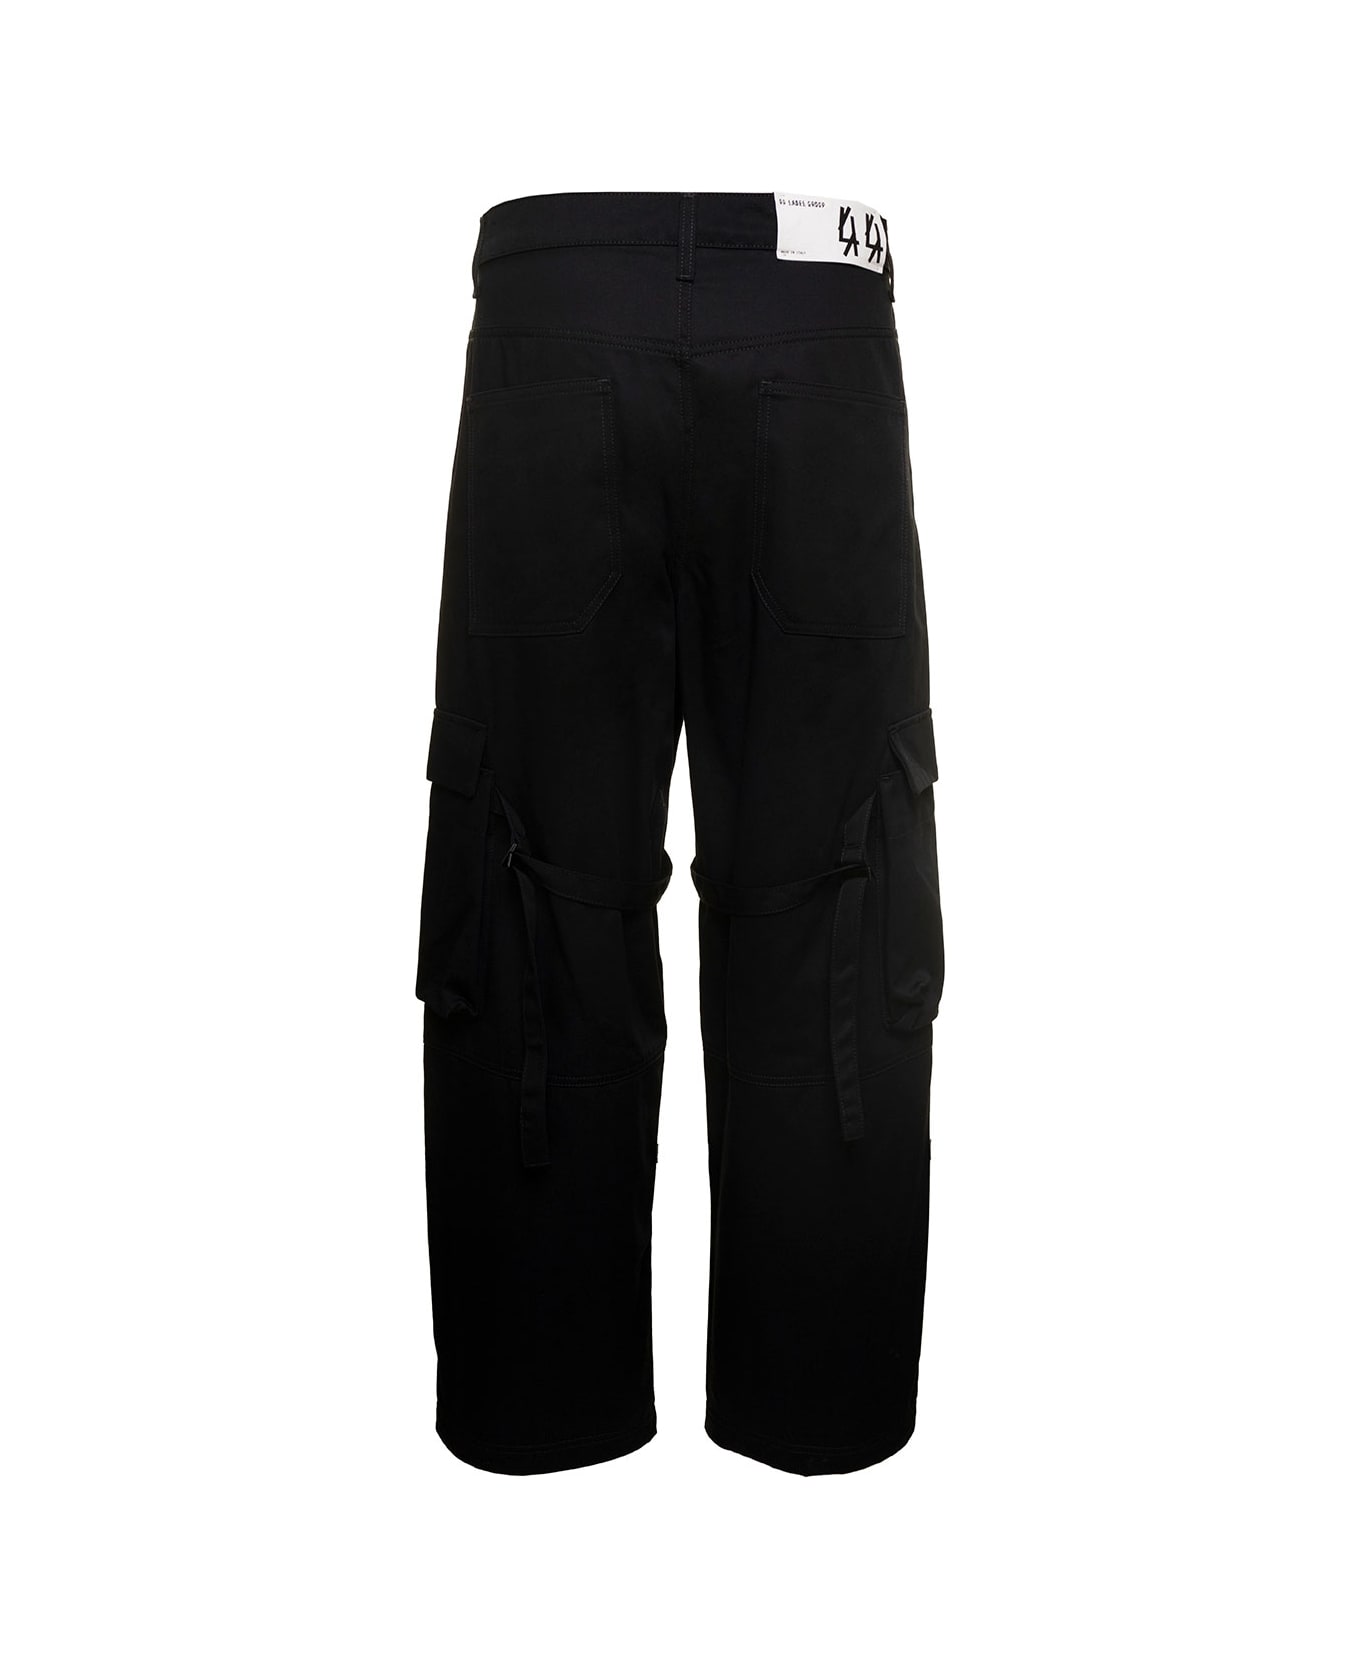 44 Label Group 'helm' Black Cargo Pants With Logo Patch In Cotton Man - Black ボトムス